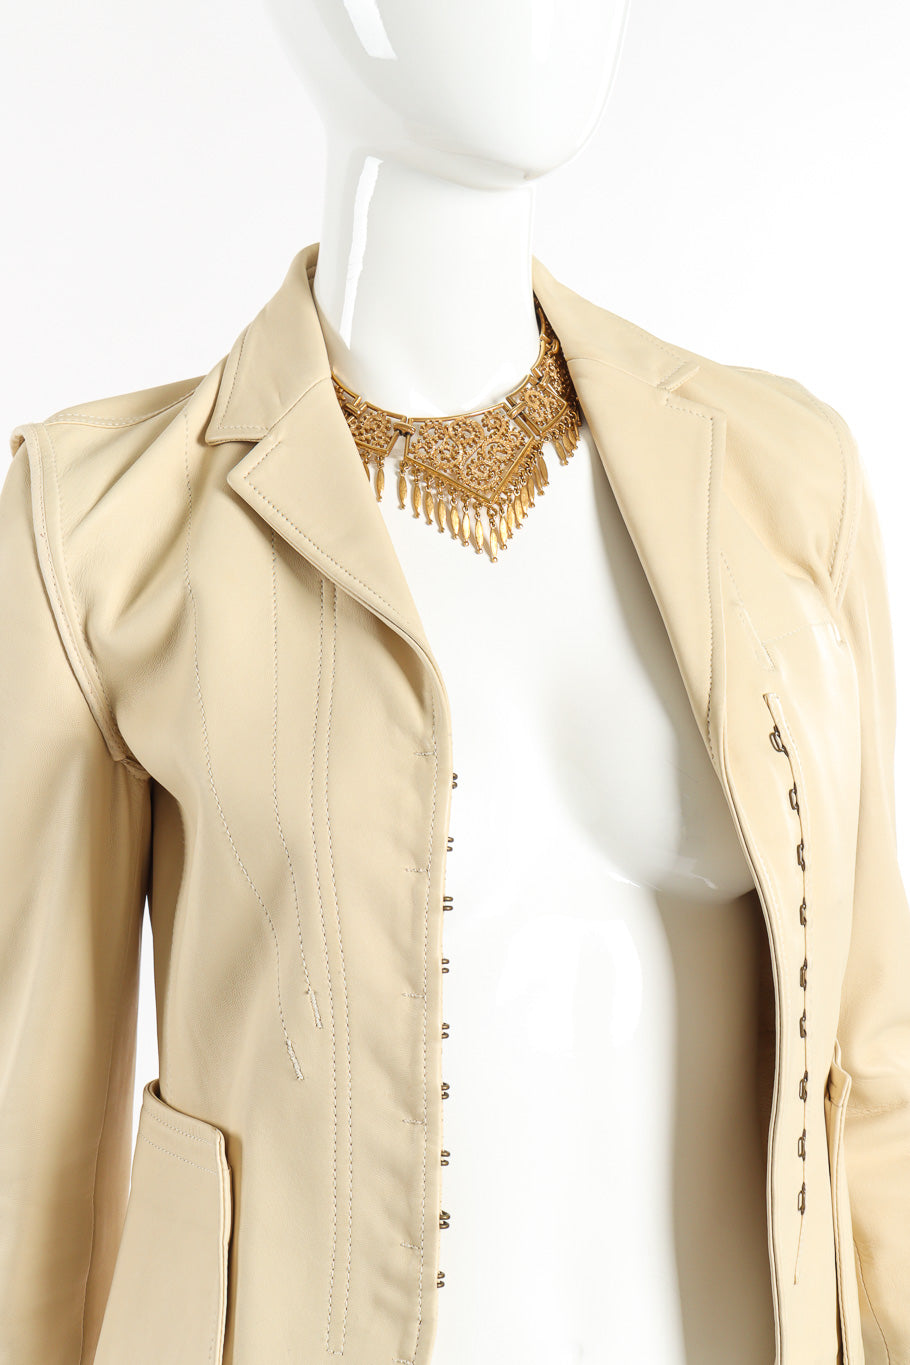 Vintage Monet Trapezoid Link Collar Necklace on mannequin with Gucci Leather Jacket @Recessla